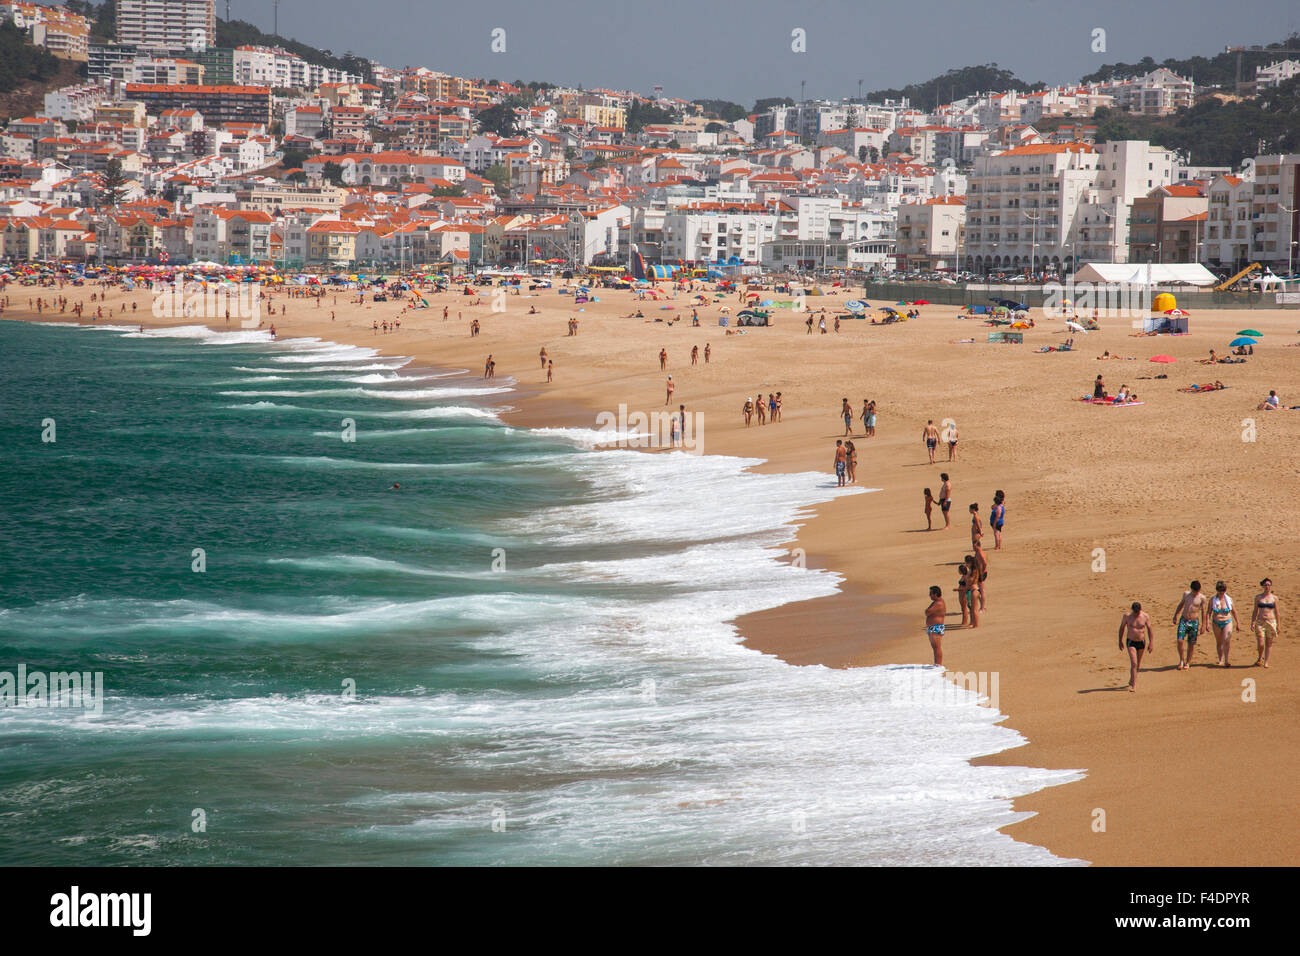 Public beach in the resort town of Nazare on the Portuguese coast Stock Photo